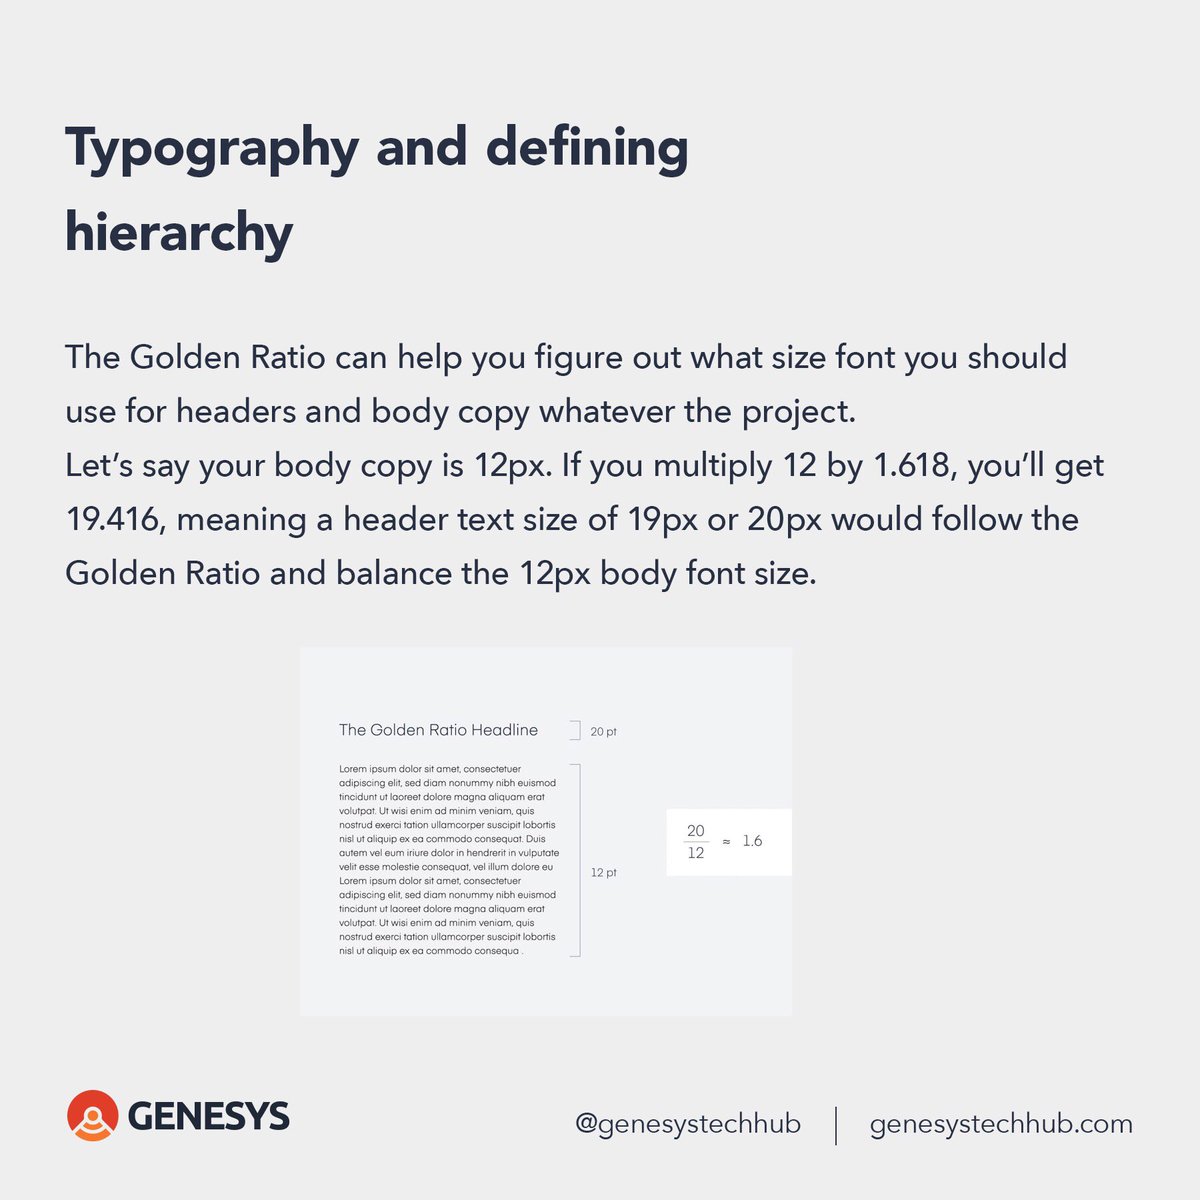 Now you know all there is about Golden Ratios. How do we use Golden Ratio in design? #weAreGenesys  #GoldenRatio  #DesignWithMong  #designthinking